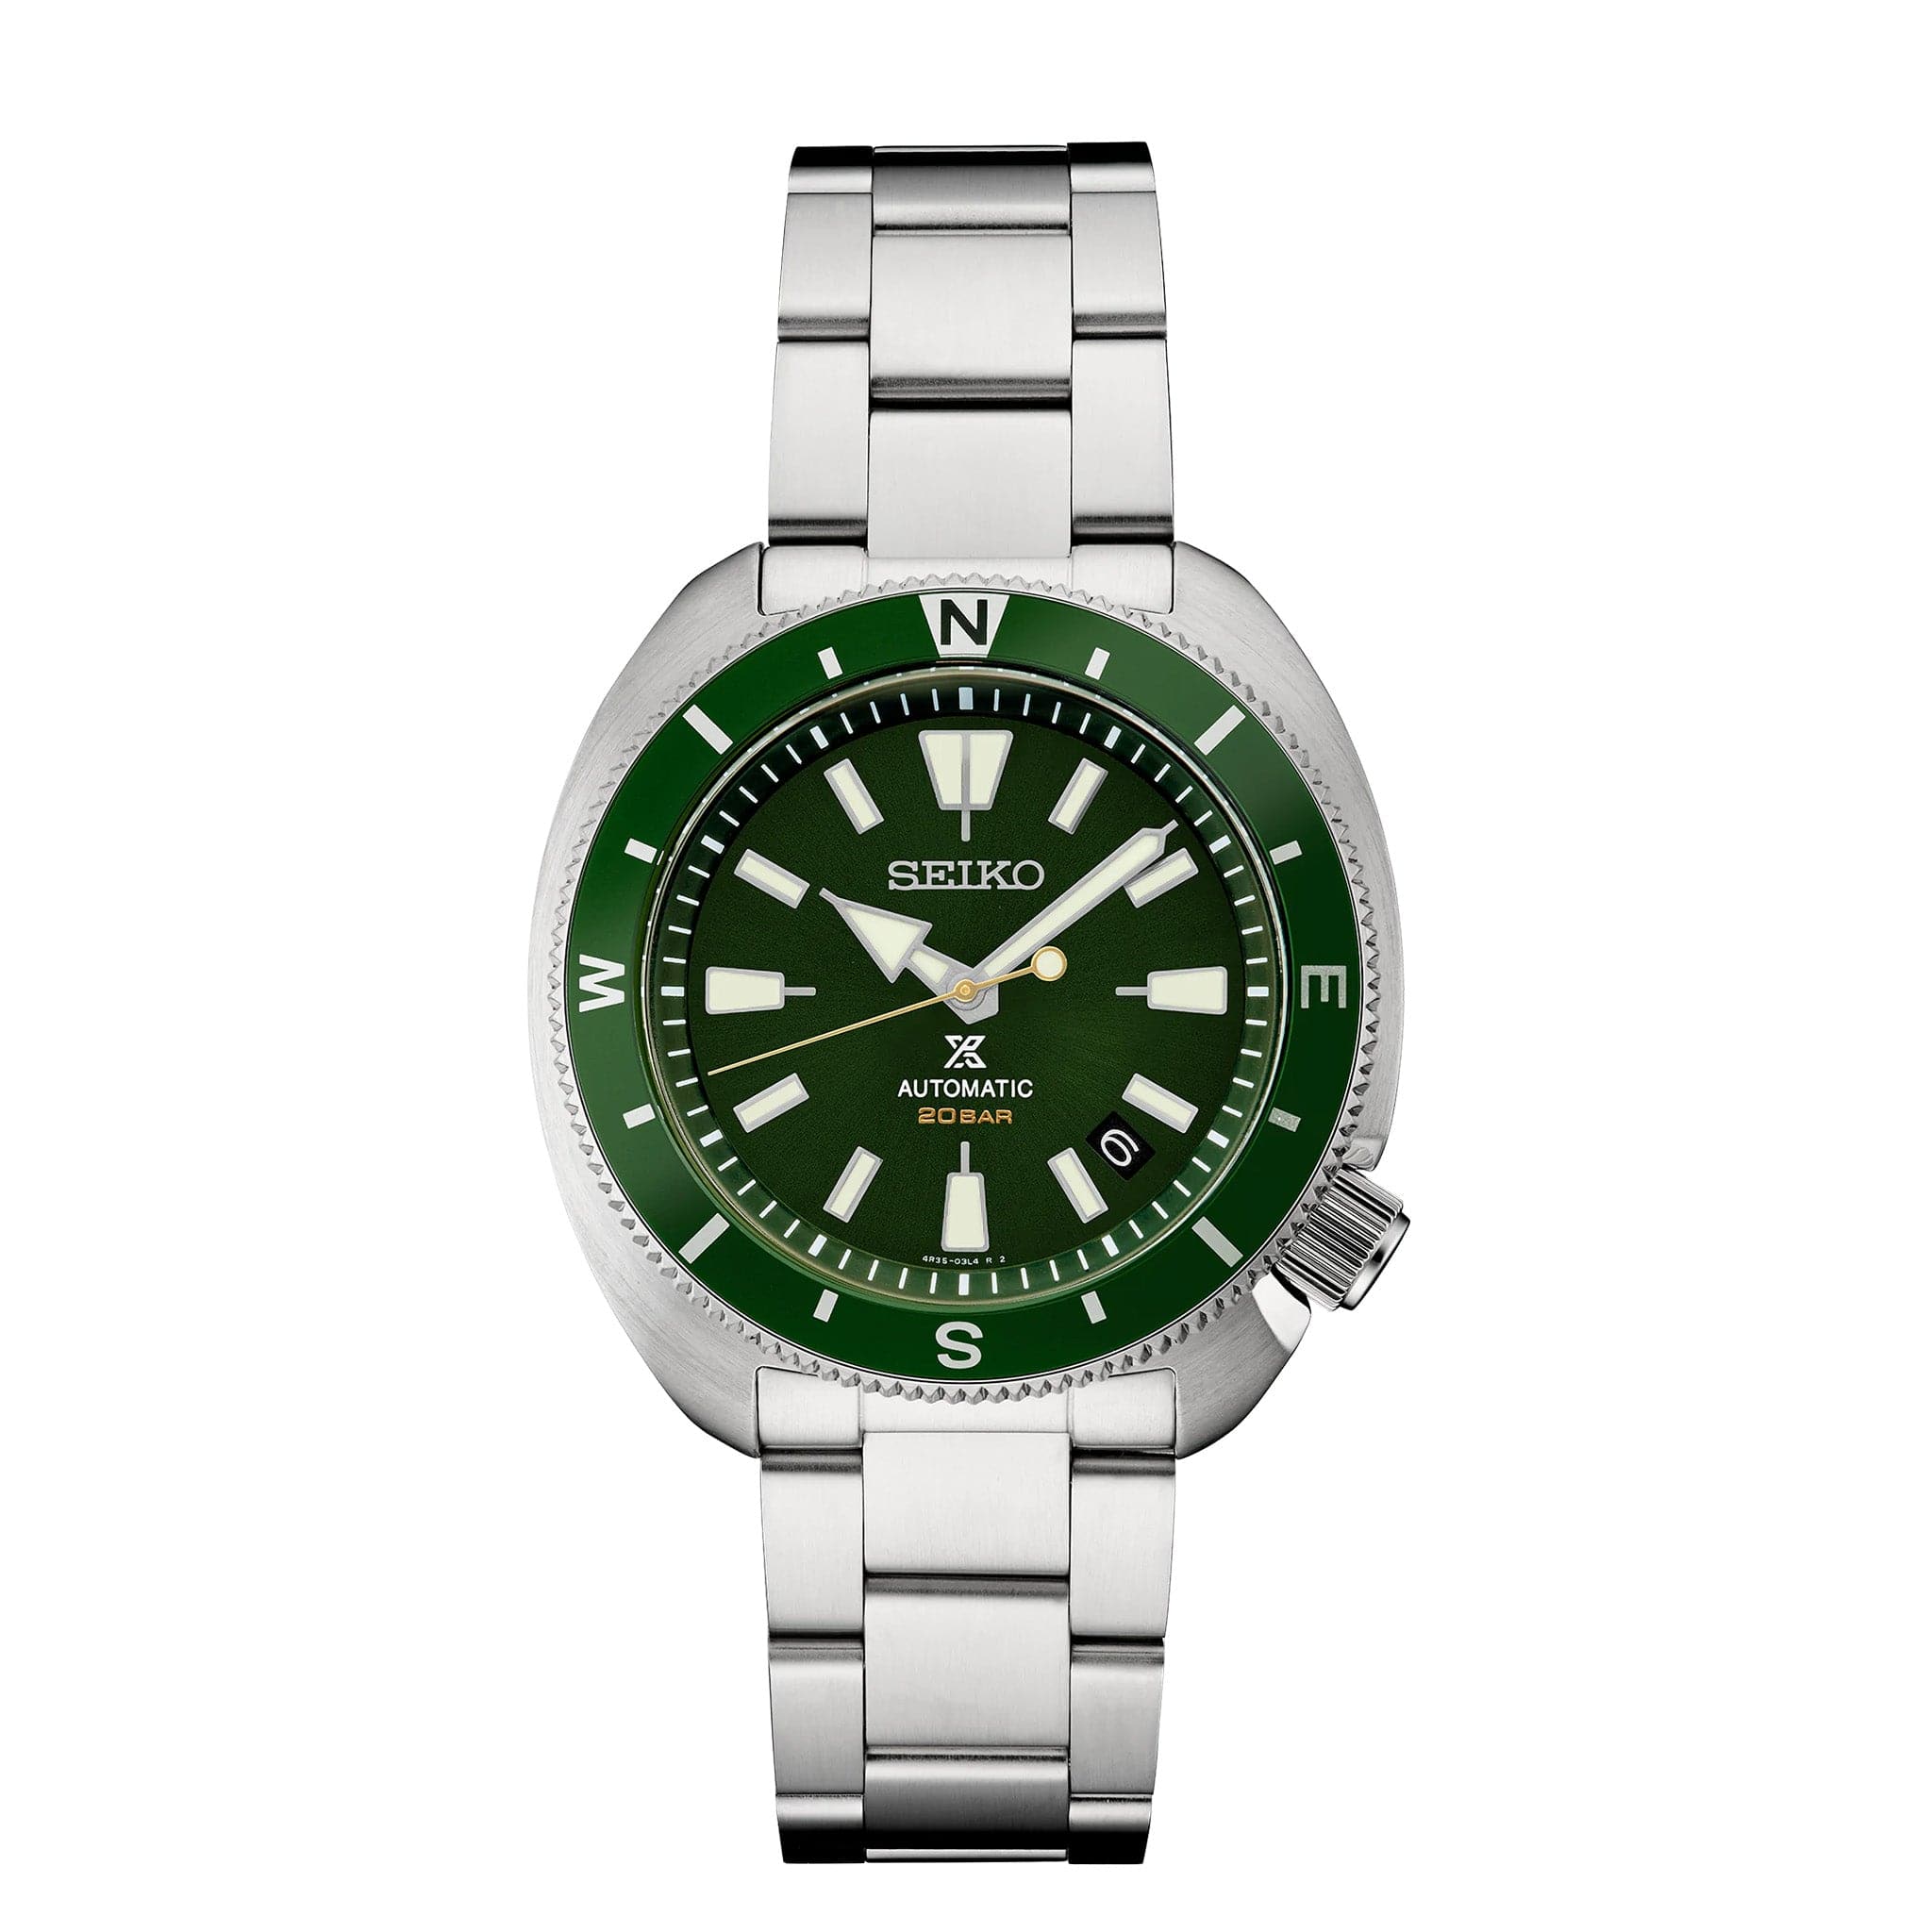 Seiko Prospex SRPH15 Green Dial Automatic Watch